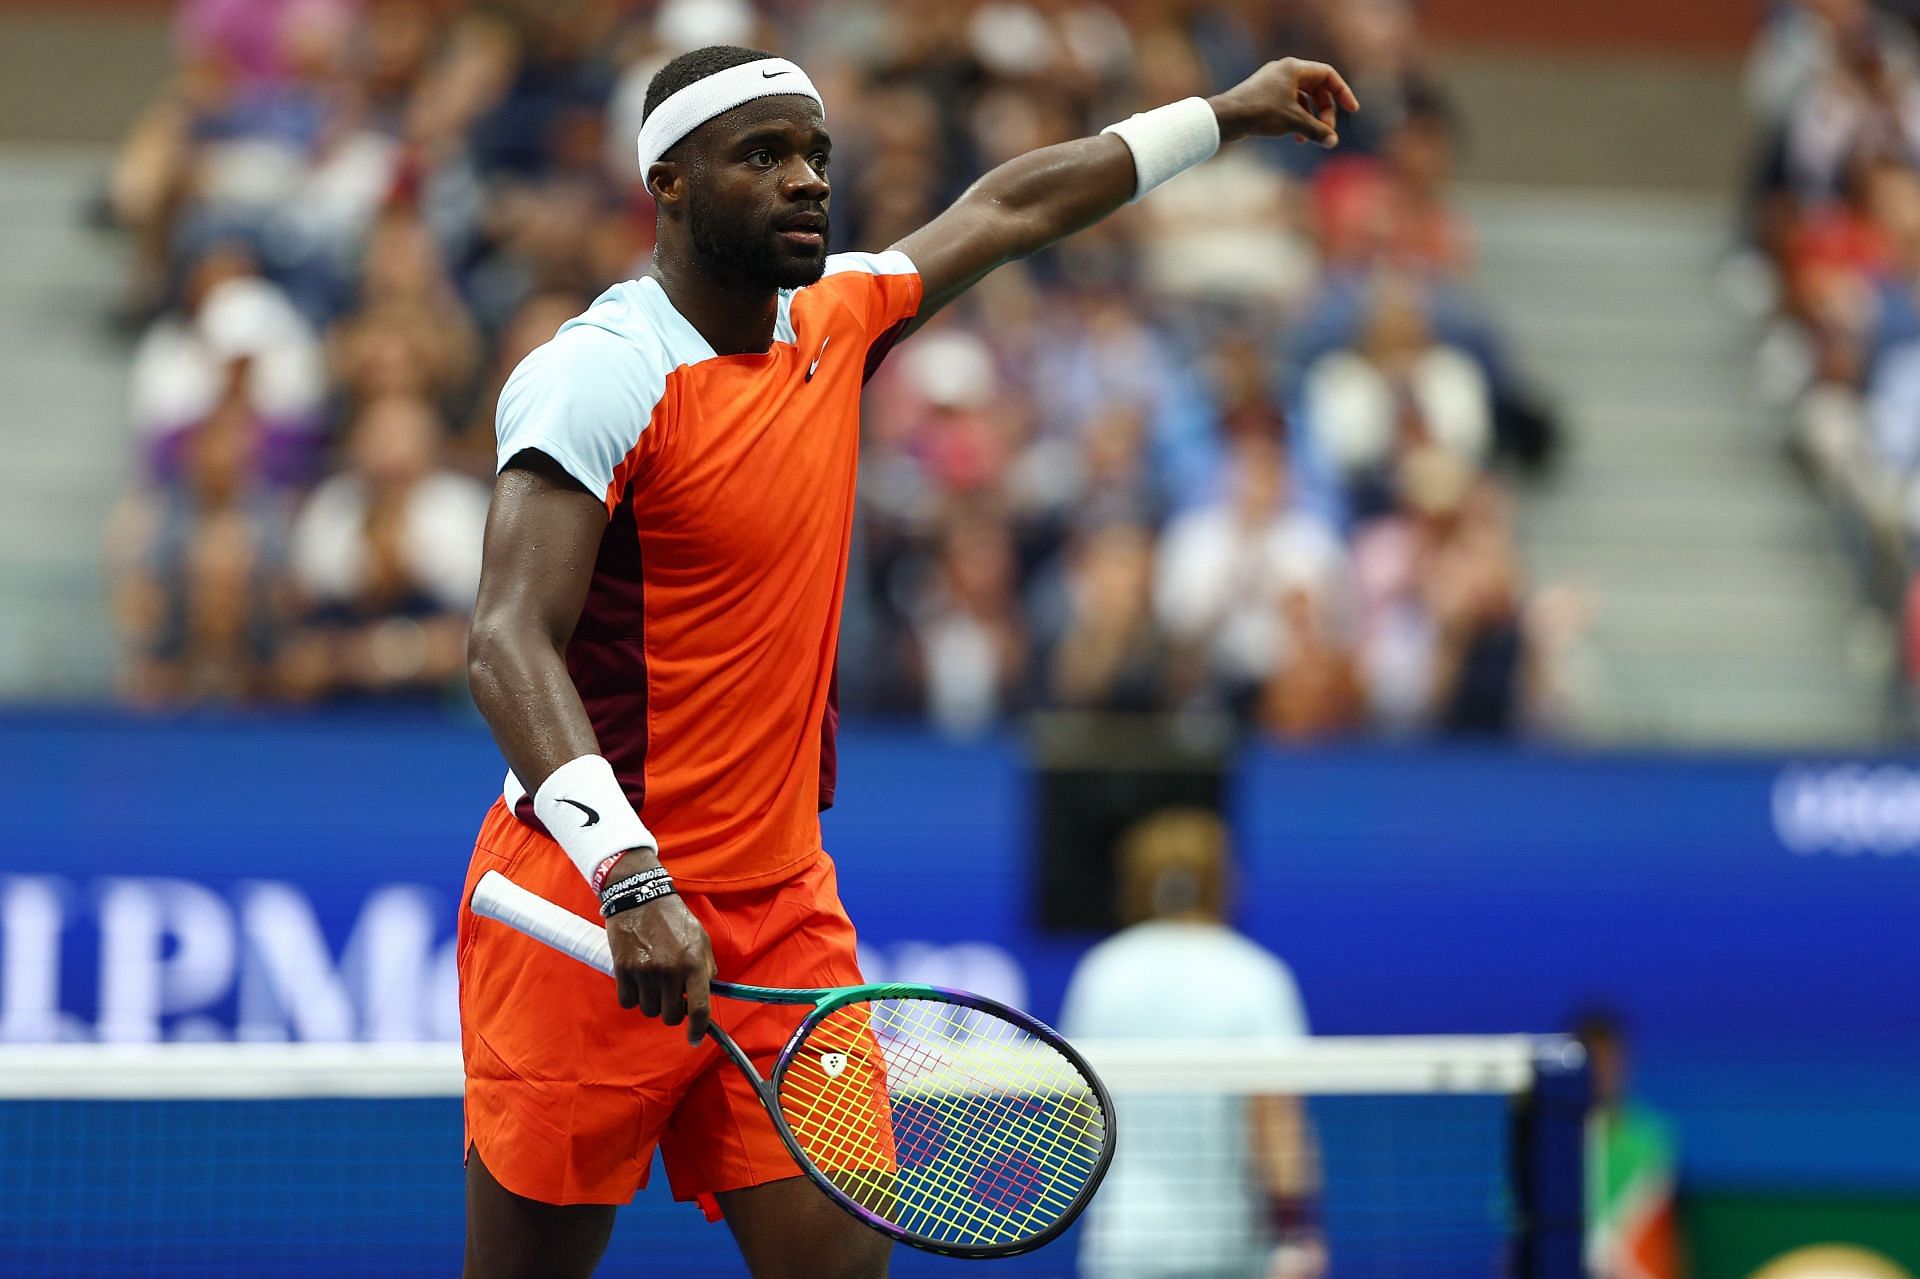 Frances Tiafoe in action against Andrey Rublev in the 2022 US Open.